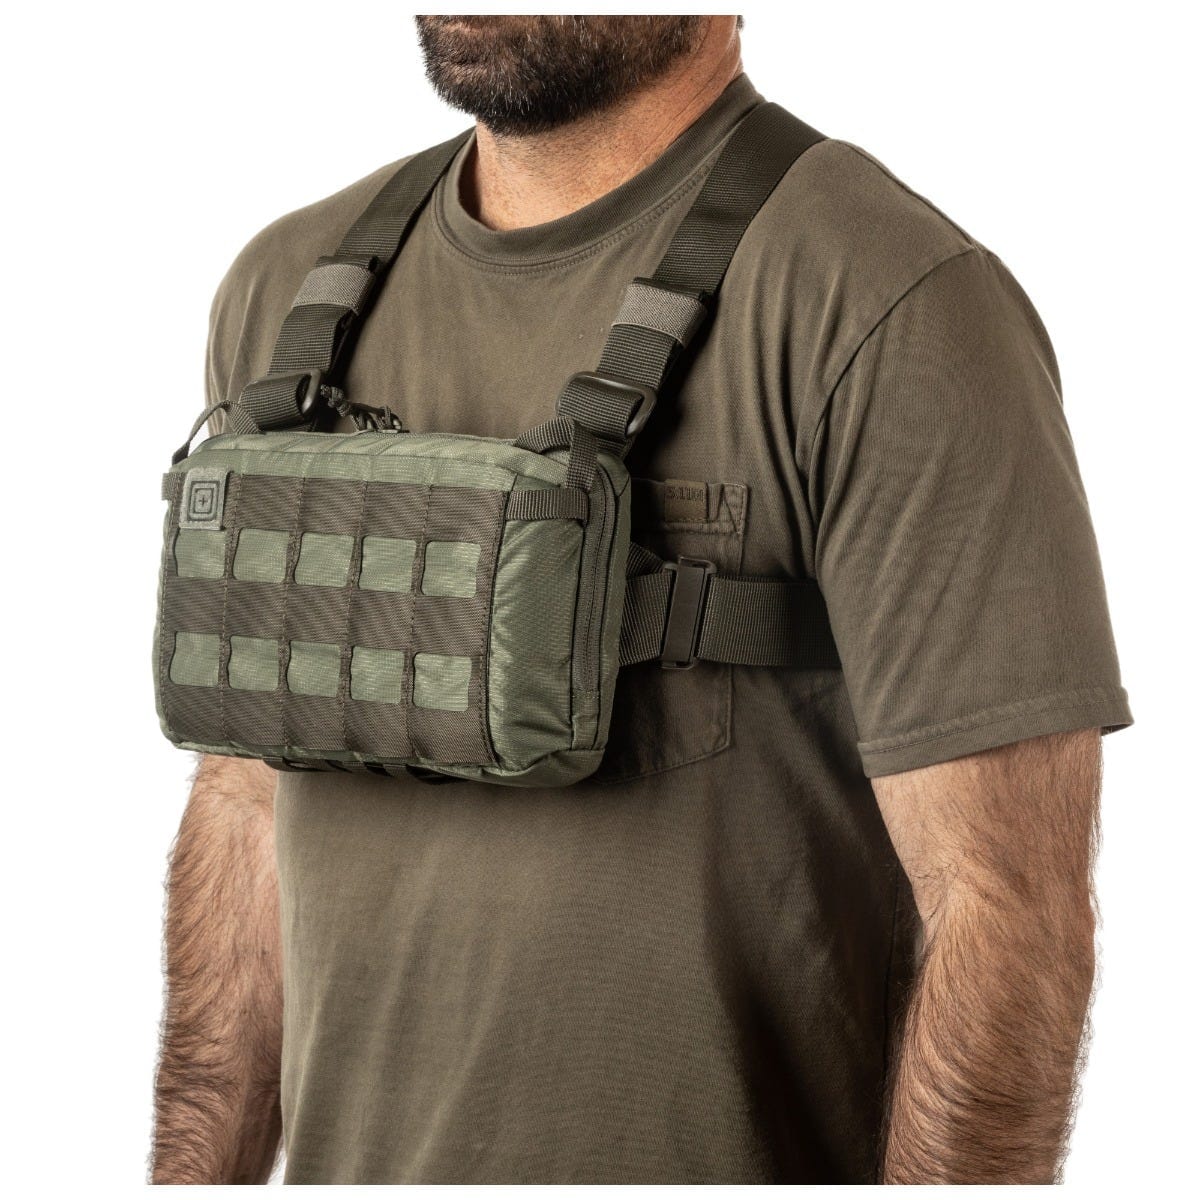 SKYWEIGHT SURVIVAL CHEST PACK